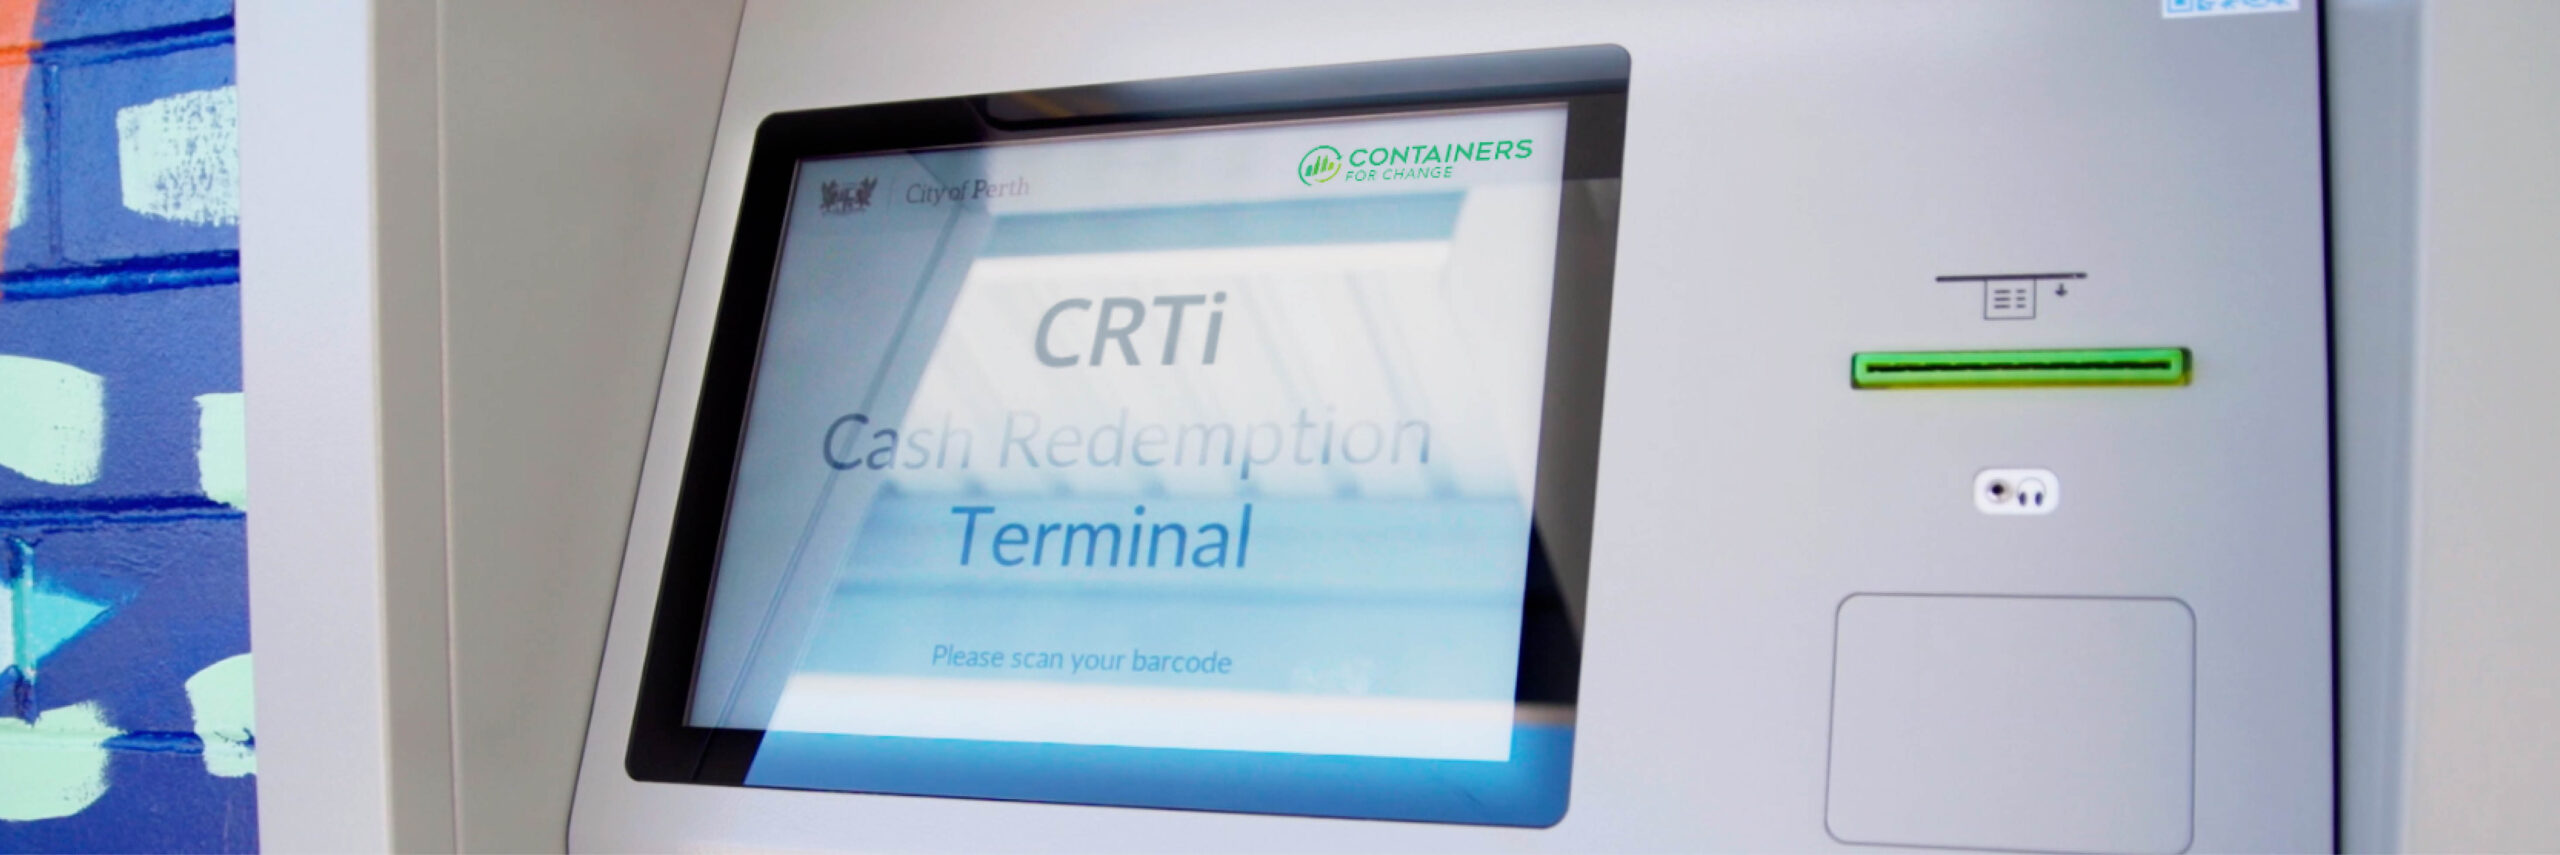 Close up of a CRTi Cash Redemption Terminal device